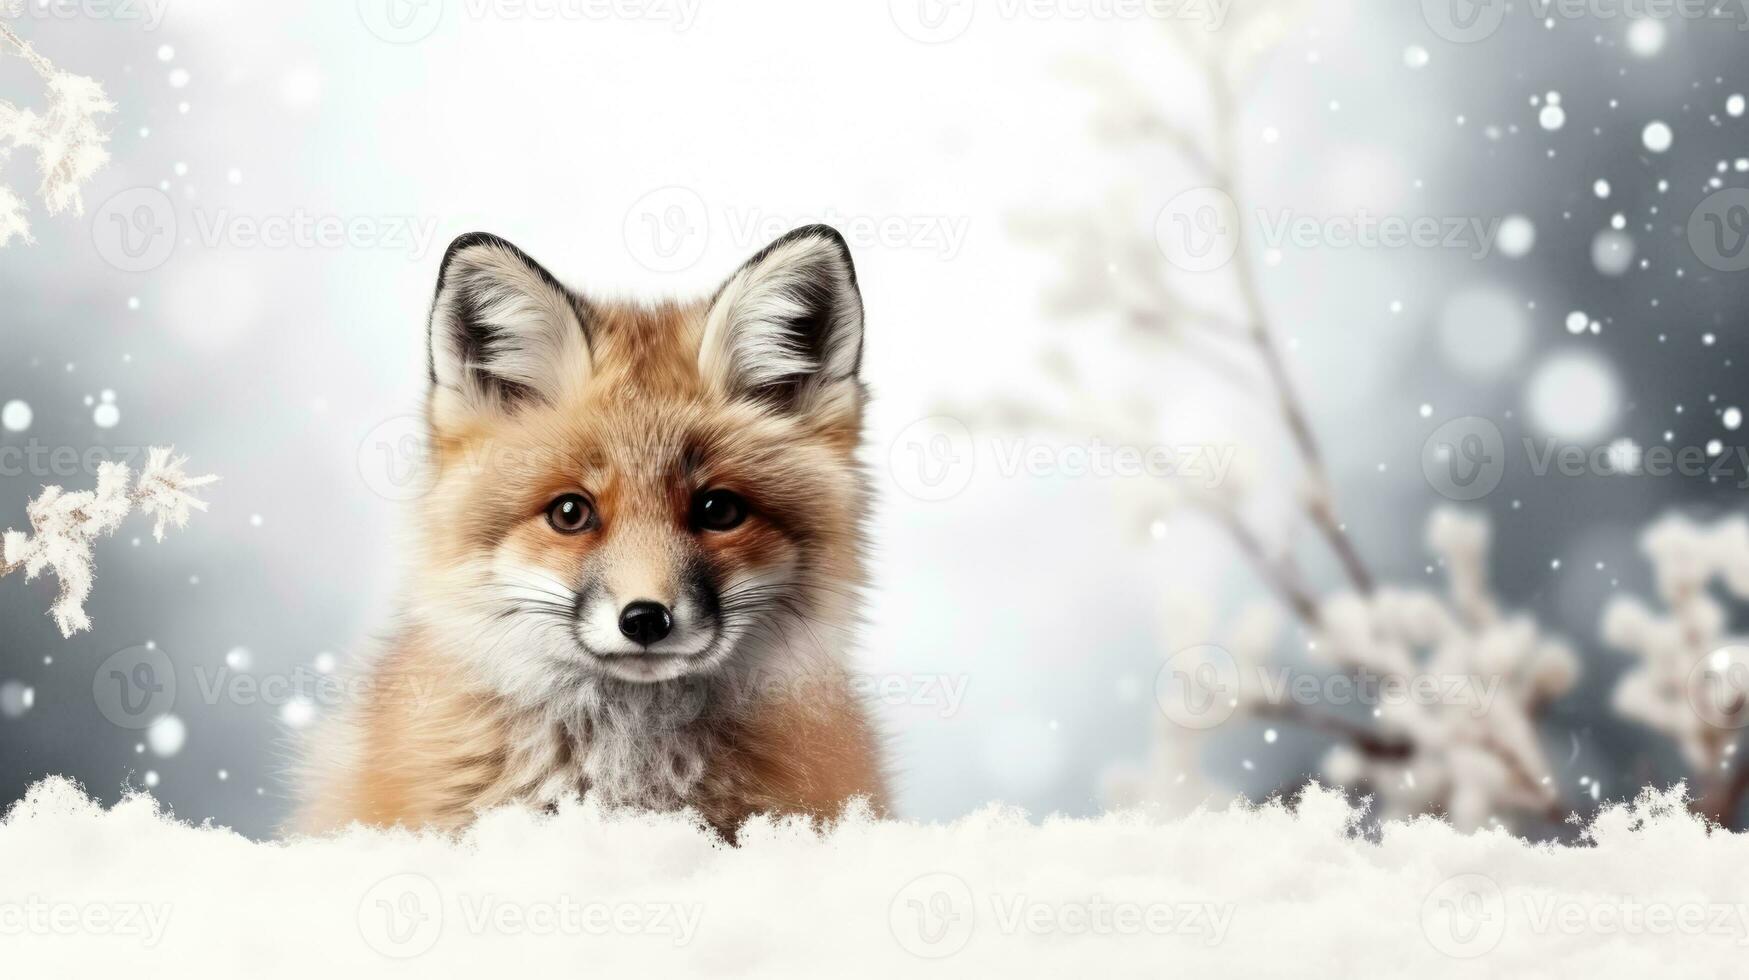 Snowy red fox on snow background with empty space for text photo